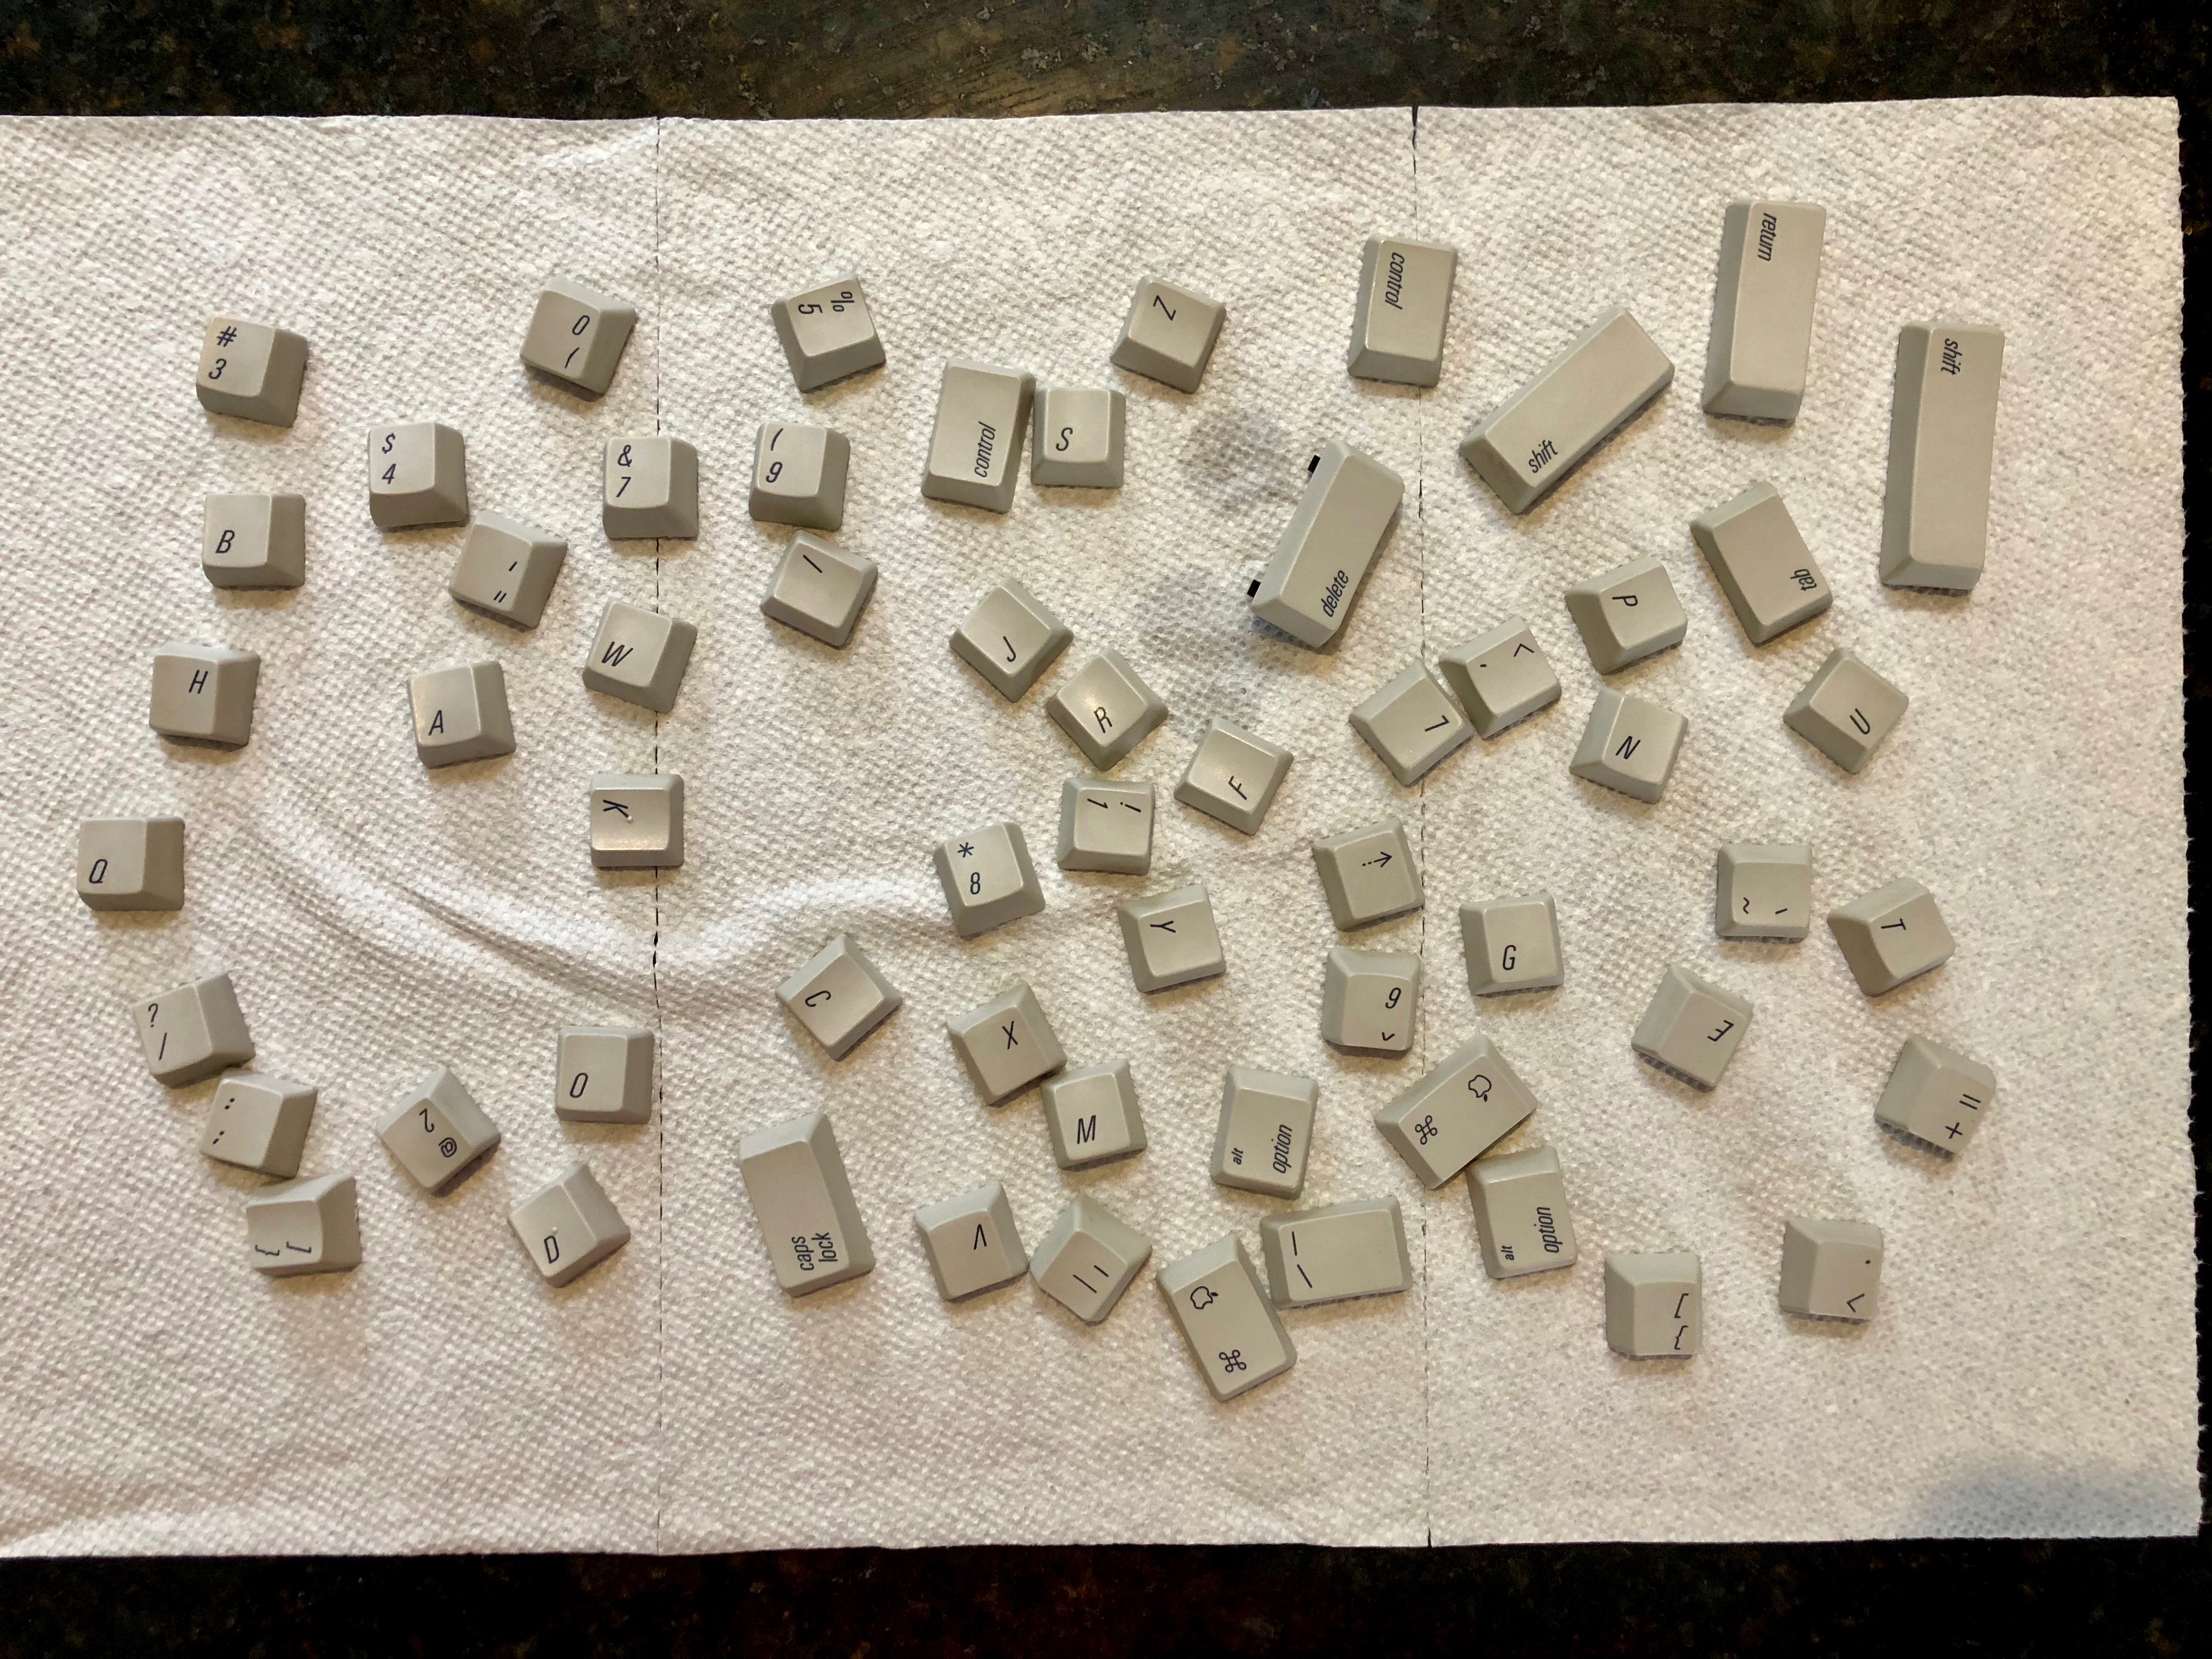 'Clean keycaps drying on a paper towel'